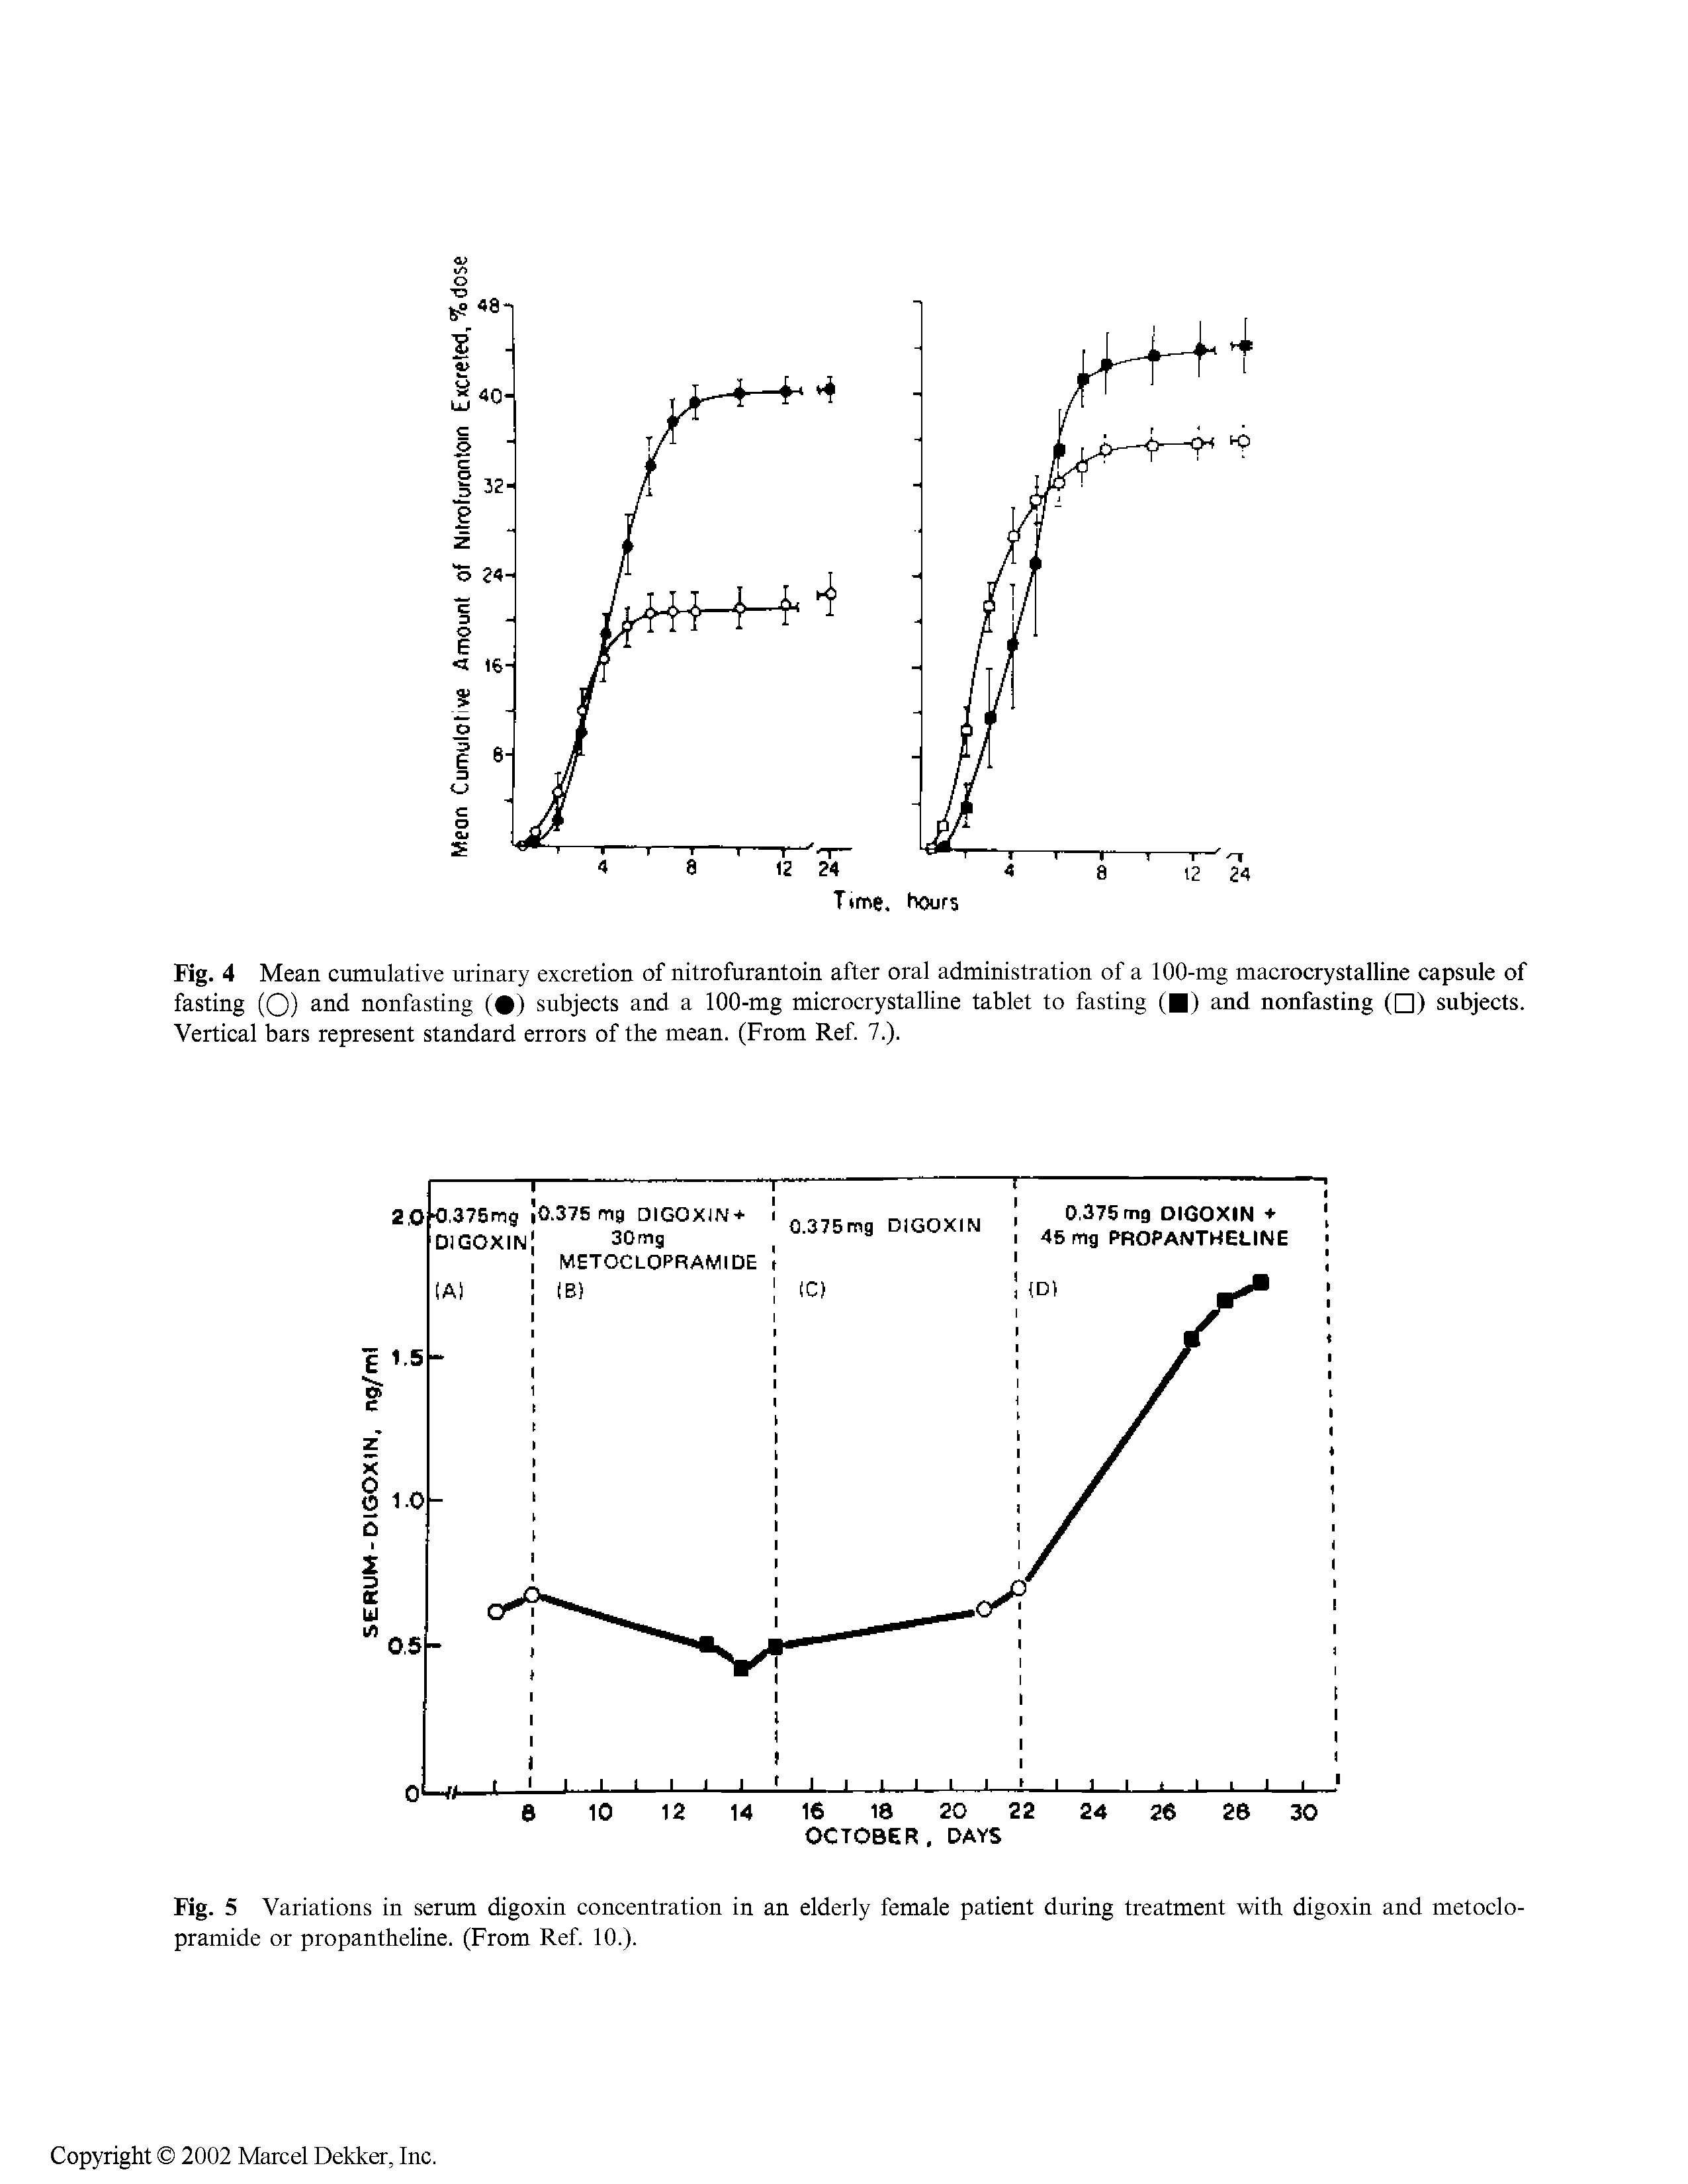 Fig. 5 Variations in serum digoxin concentration in an elderly female patient during treatment with digoxin and metoclo-pramide or propantheline. (From Ref. 10.).